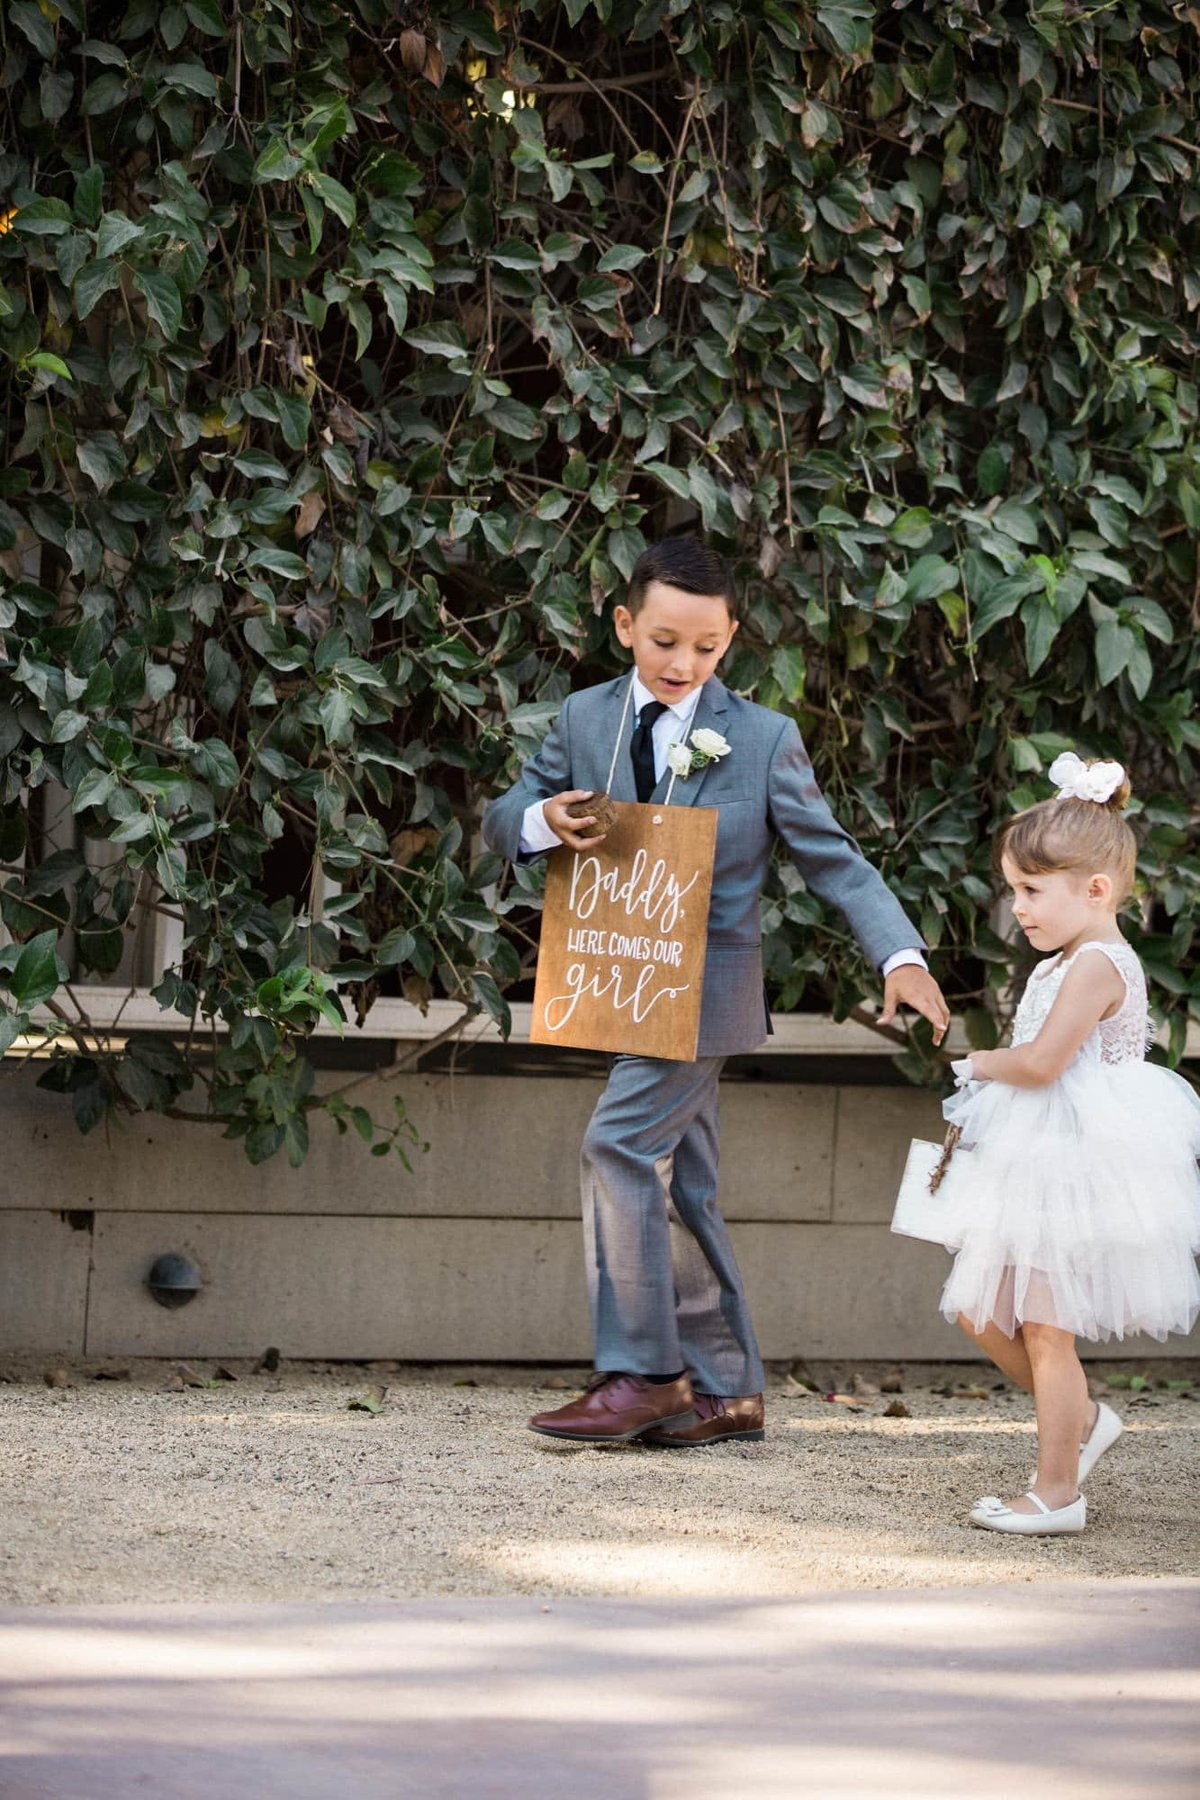 Ring bearer reaches for the flower girl's hand prior to walking down the aisle